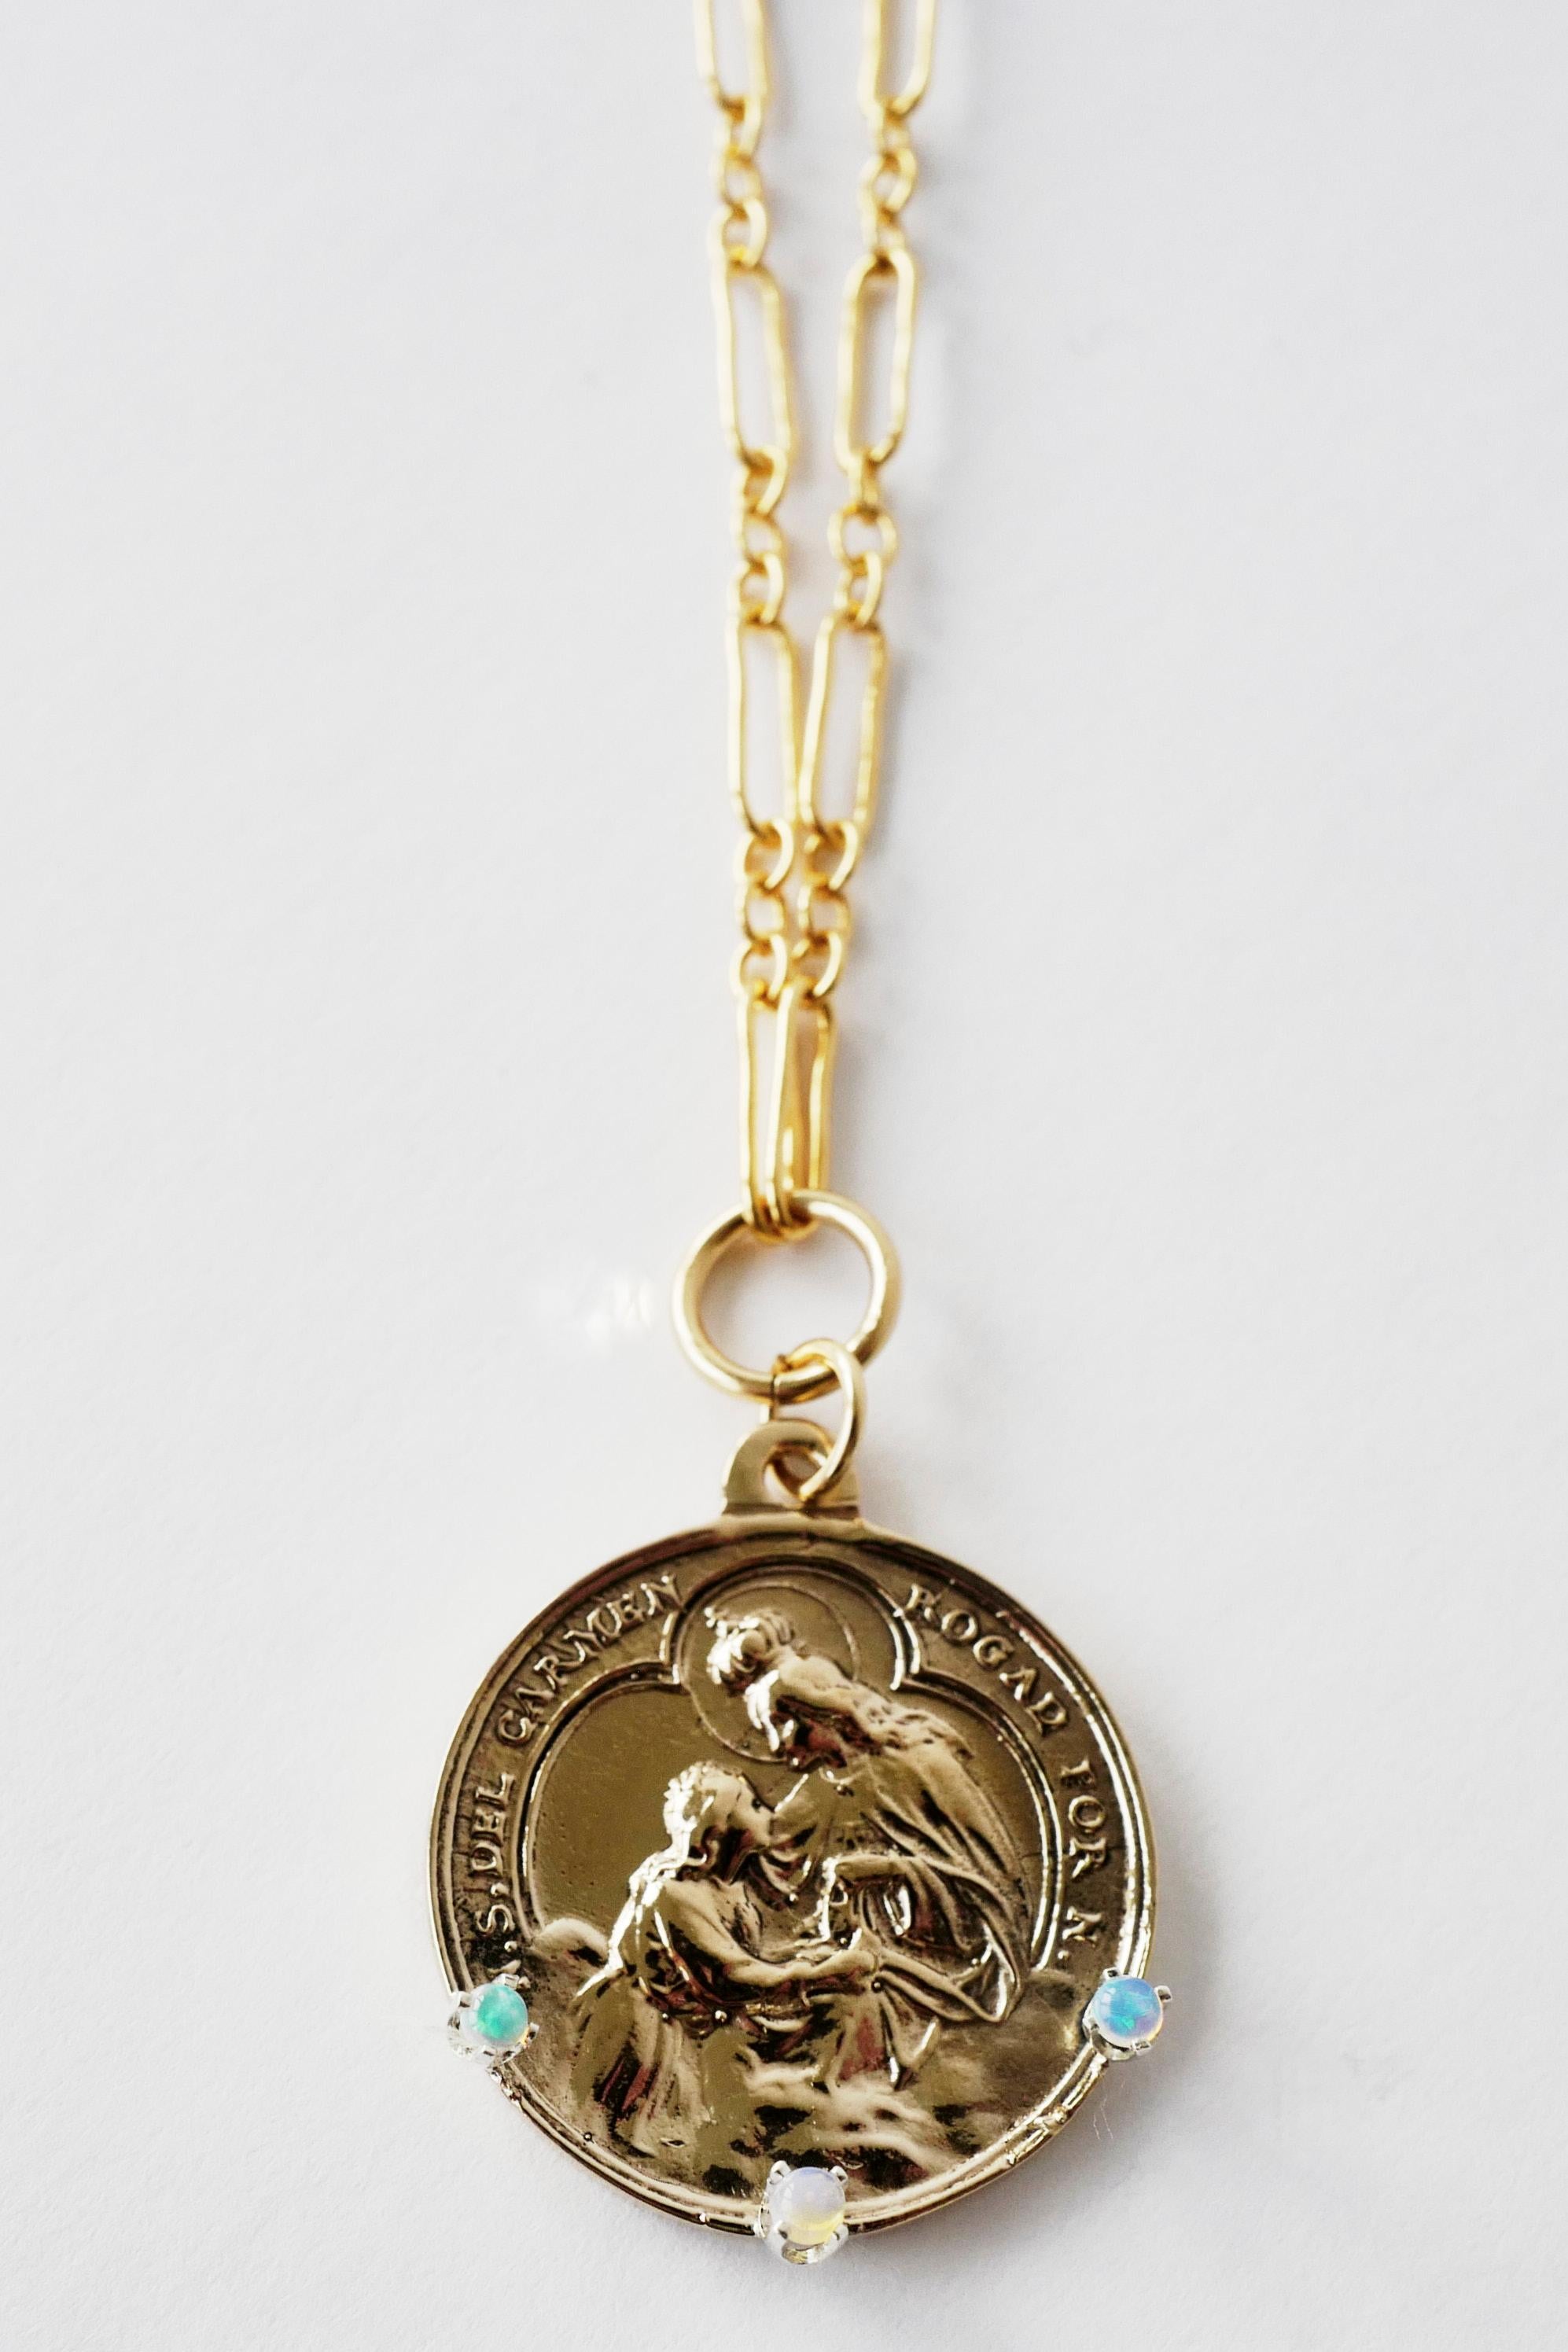 Opal Virgin Mary Medal Chain Necklace Pendant J Dauphin For Sale 5